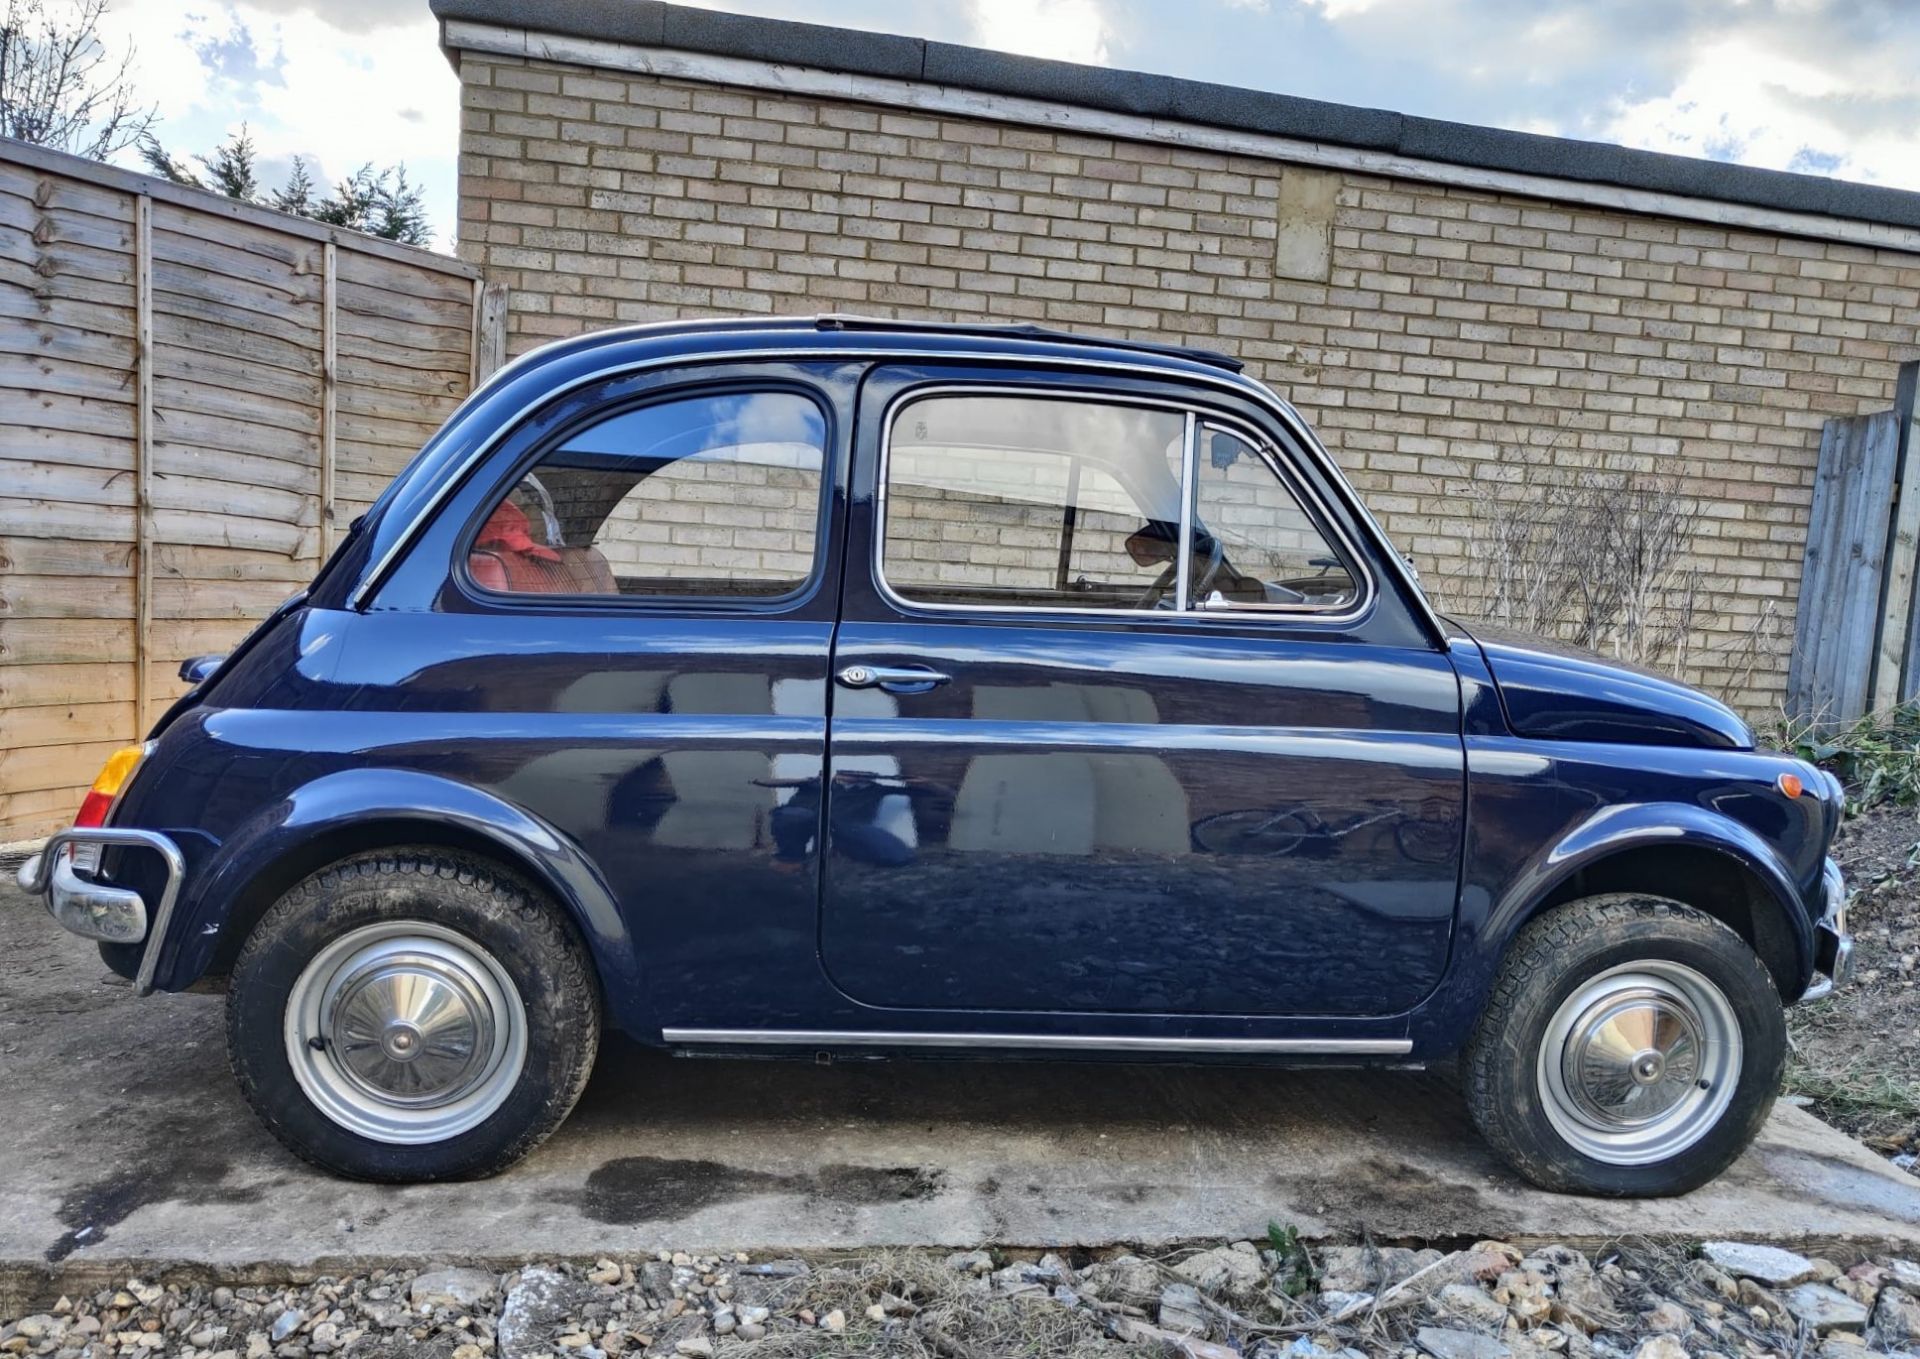 1971 FIAT 500L SALOON Registration Number: JBY 492J Chassis Number: TBA Recorded Mileage: 40,300 - Image 2 of 13